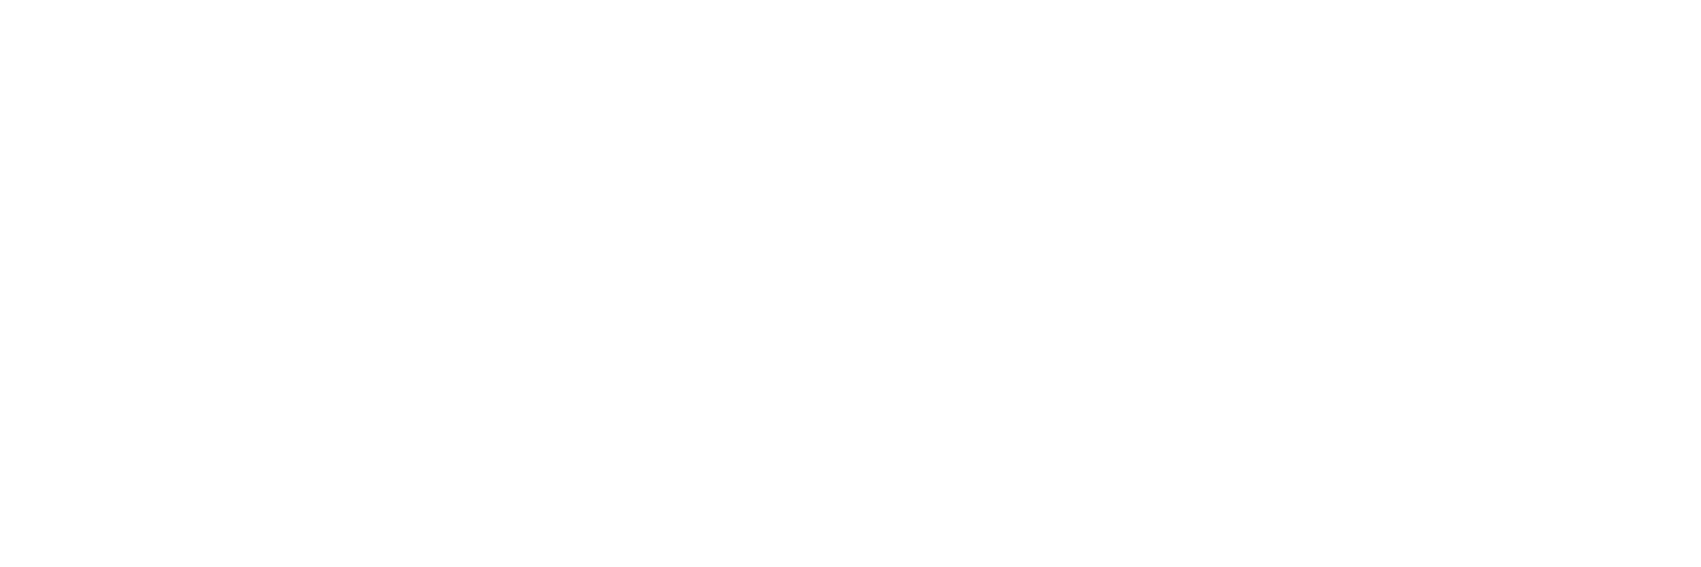 Rutherford Movement Exchange